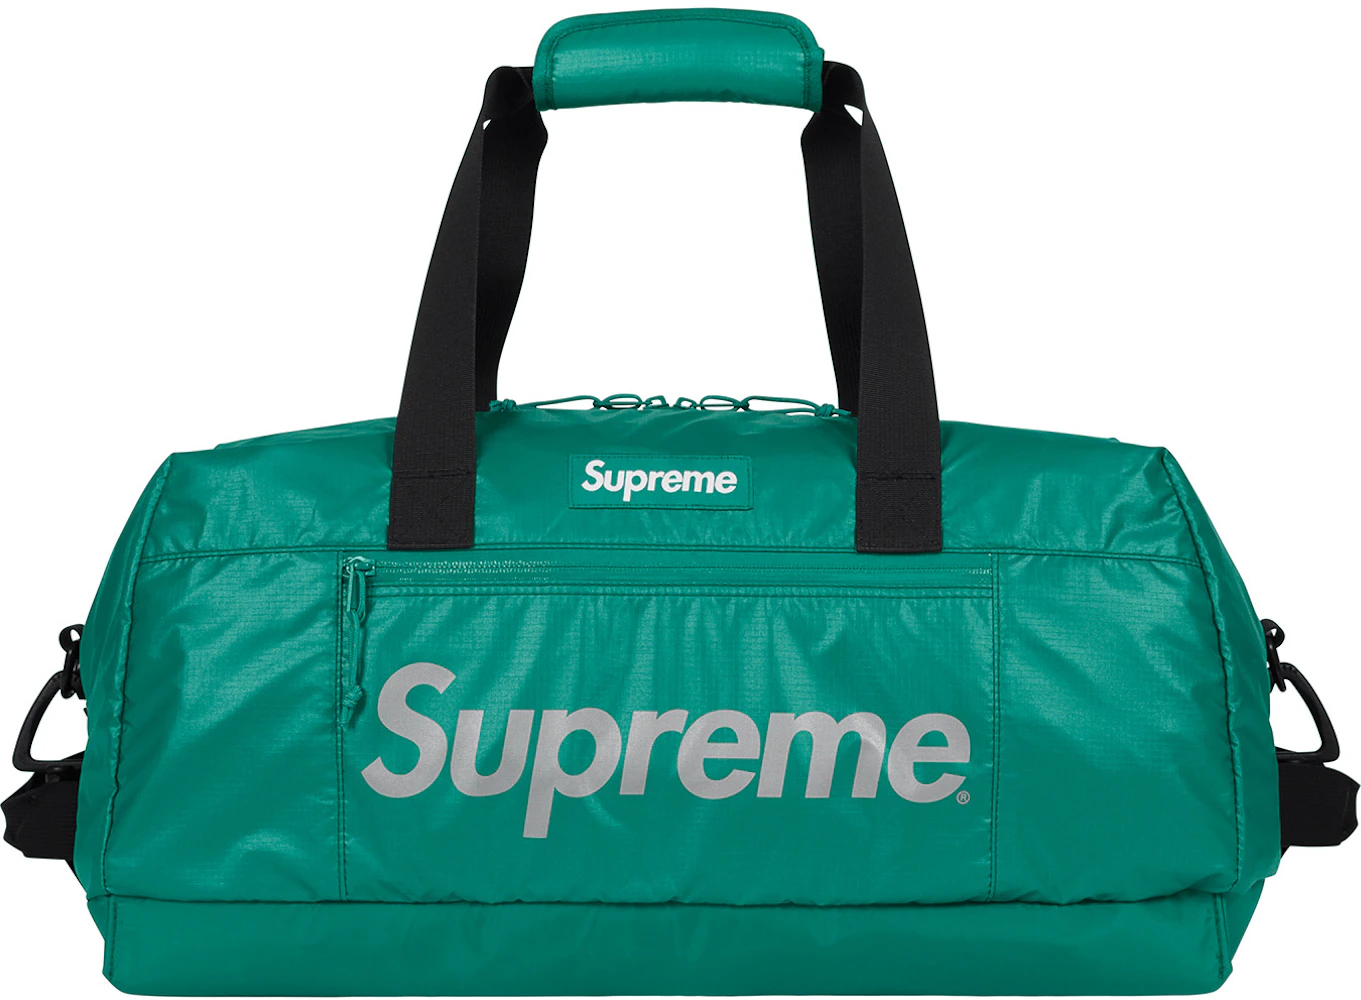 Modest Supreme Duffle Bag by Modest Supreme